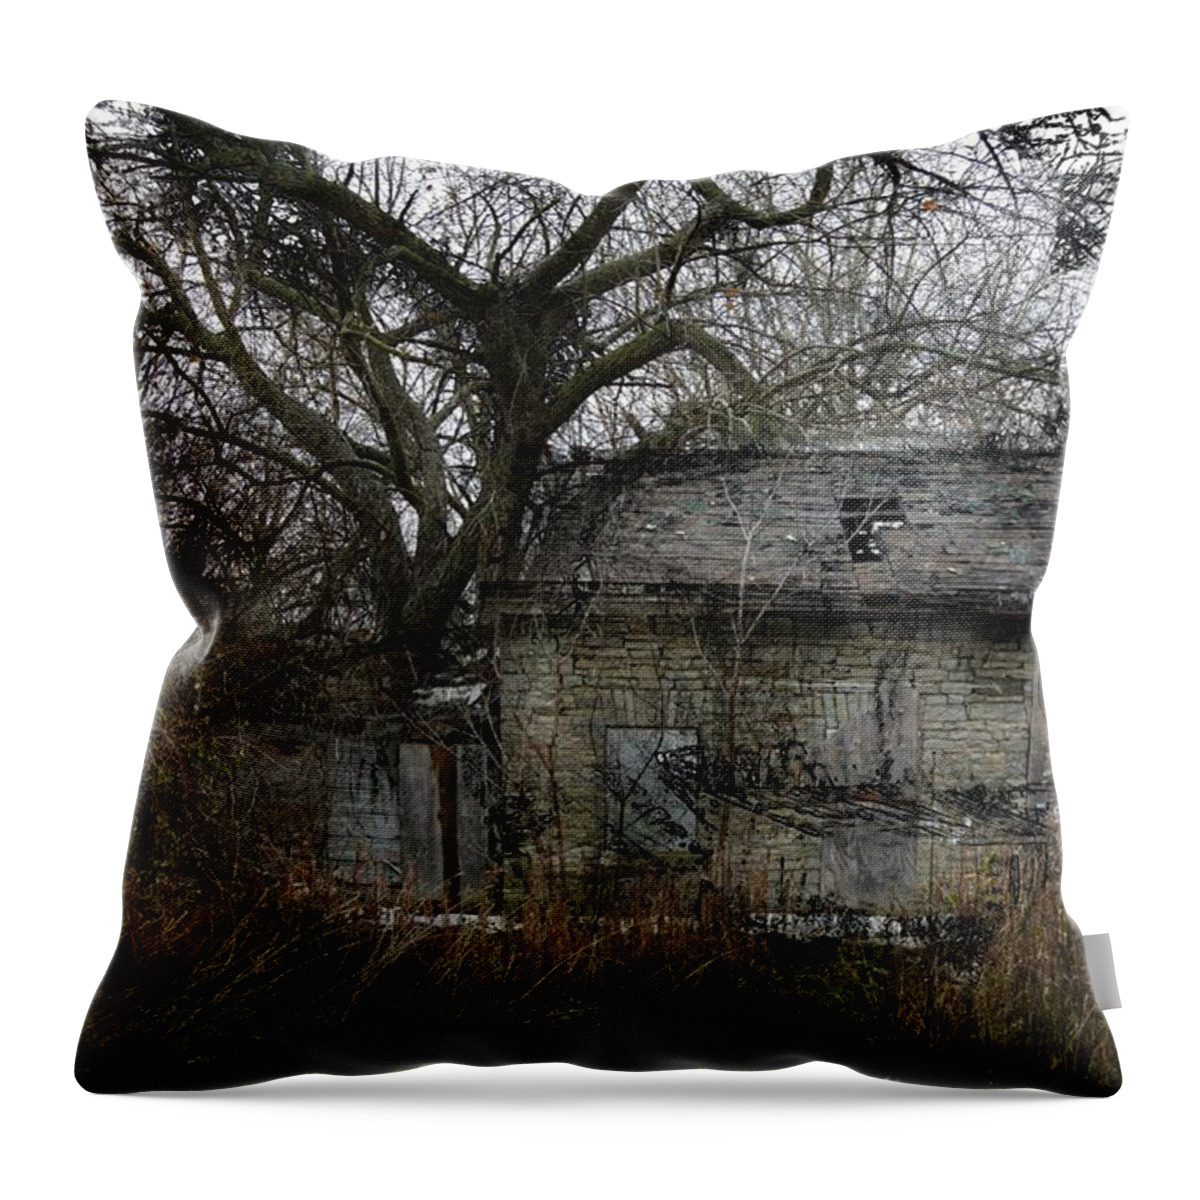 Abandoned Throw Pillow featuring the photograph The Earth Reclaims by Jim Vance